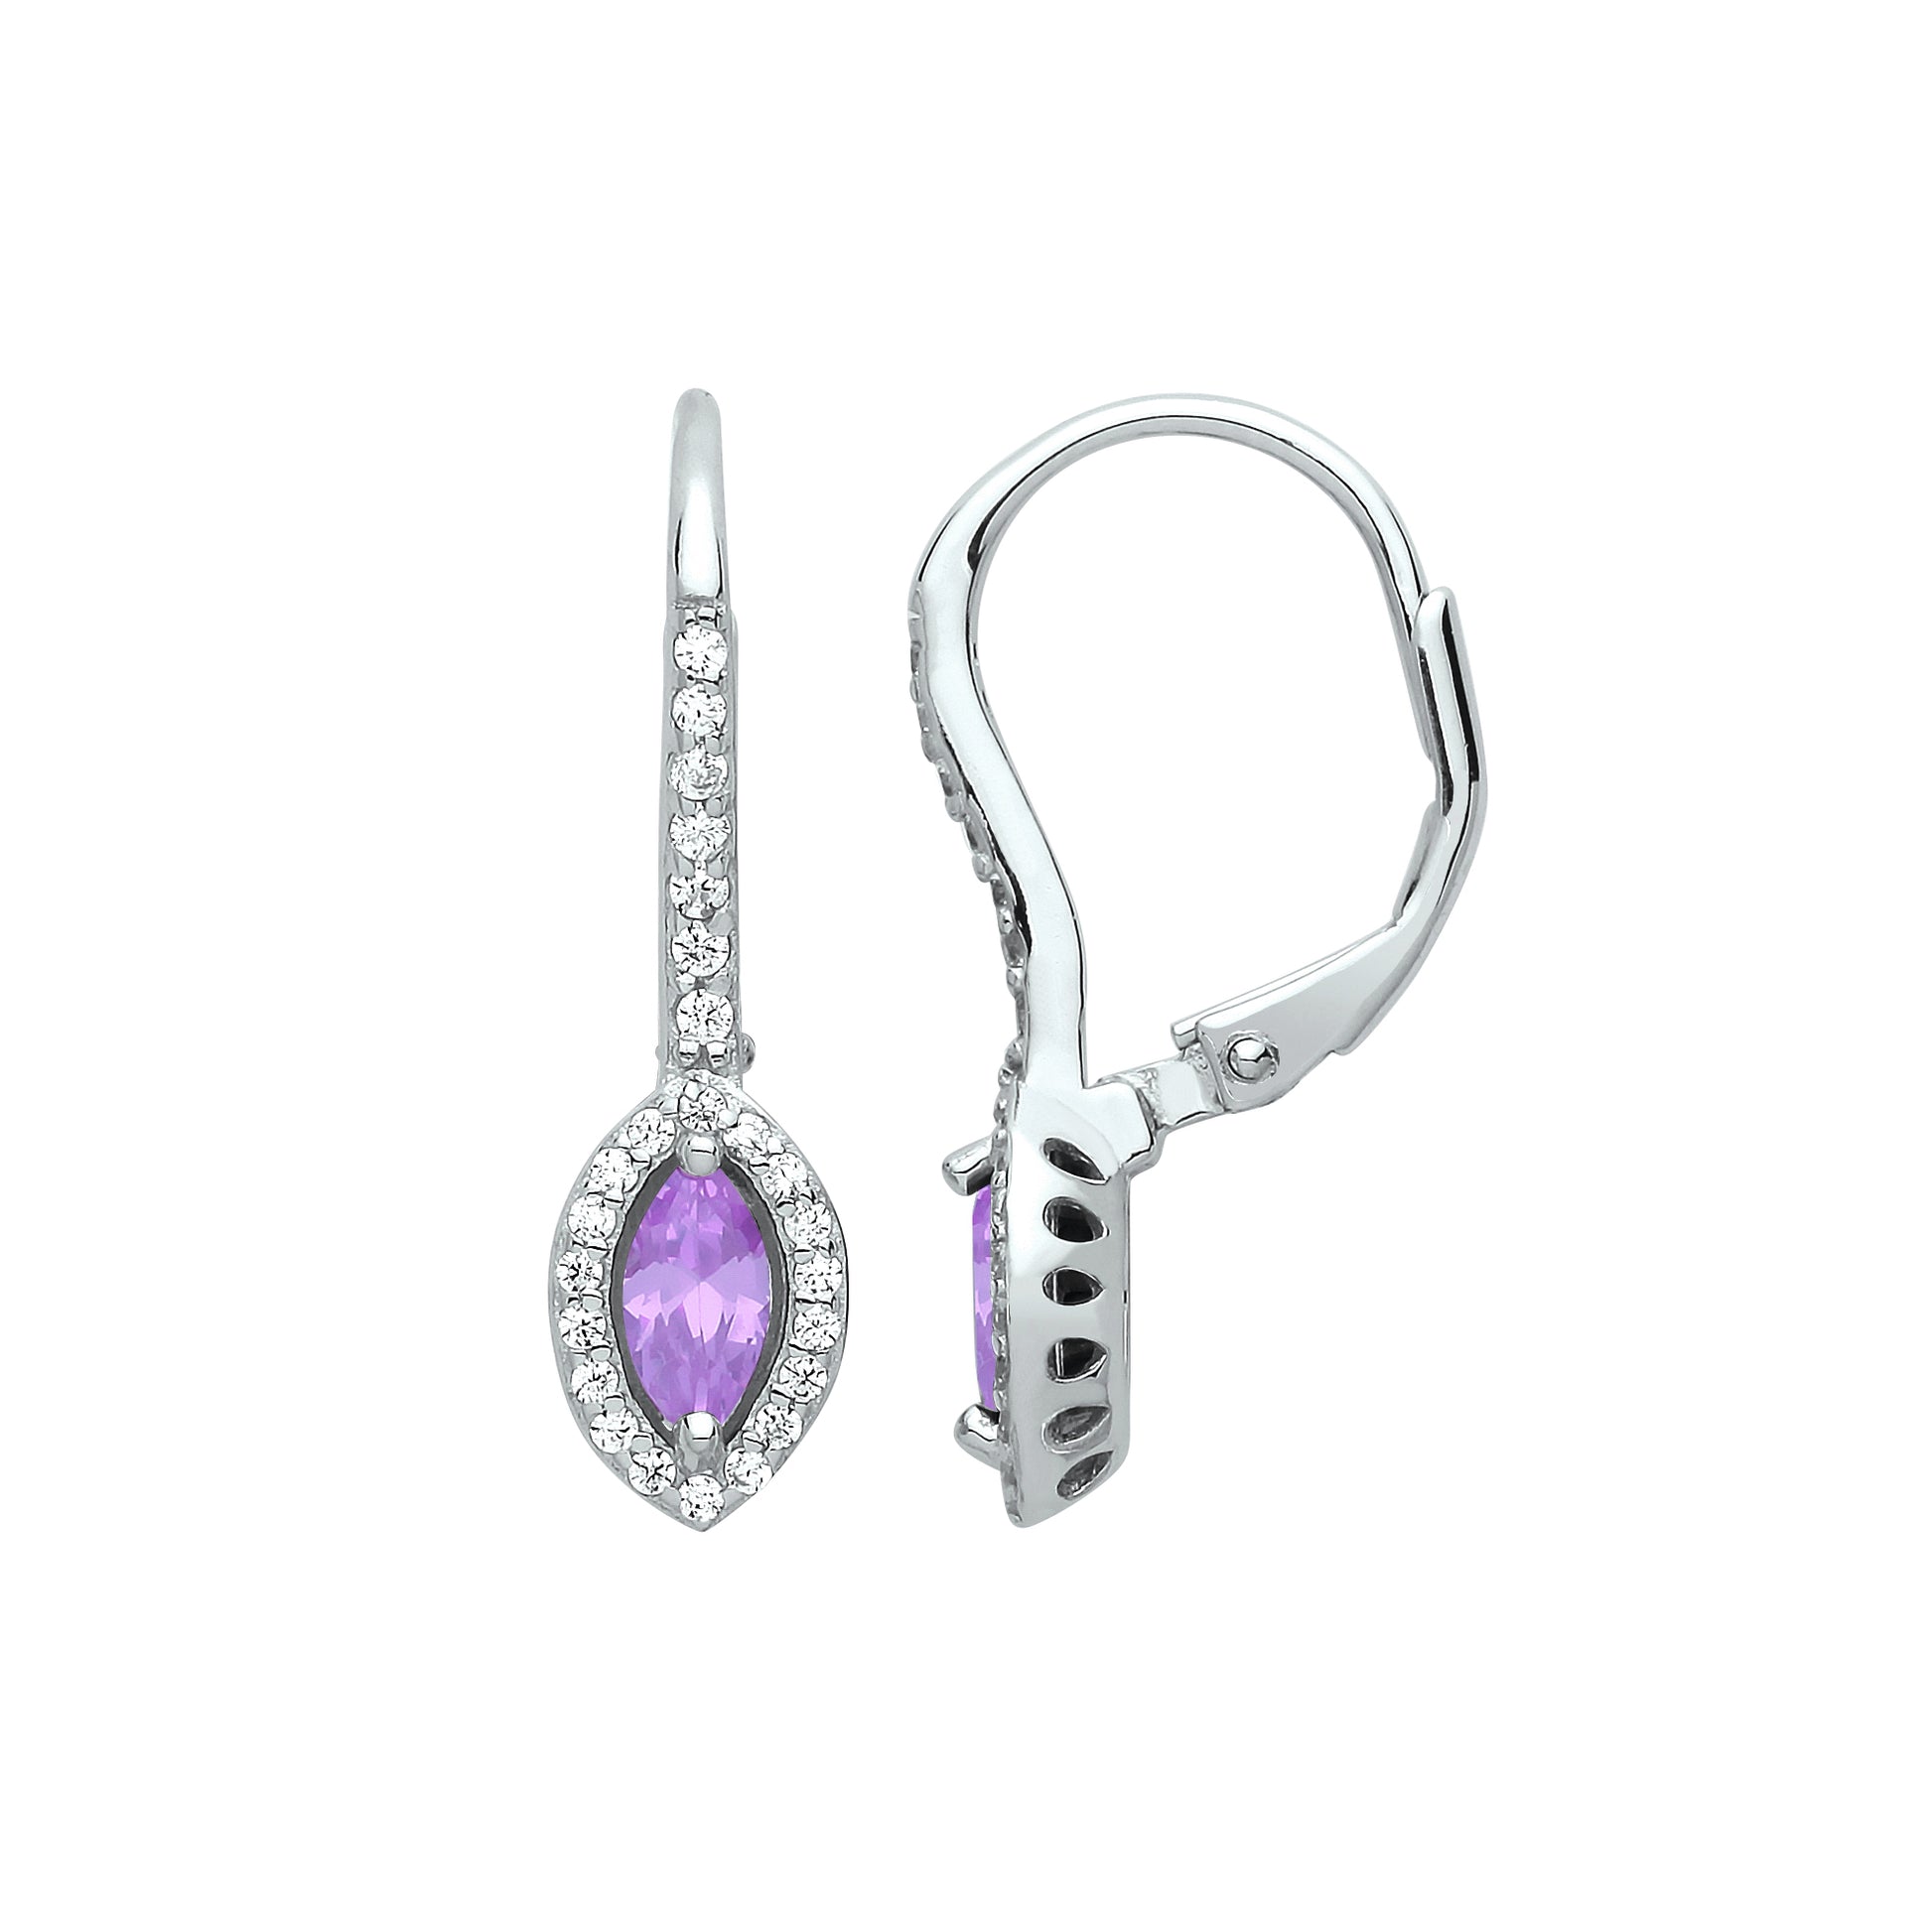 Silver  Lilac Marquise CZ Cat's Eyes Drop Earrings - GVE816VIO